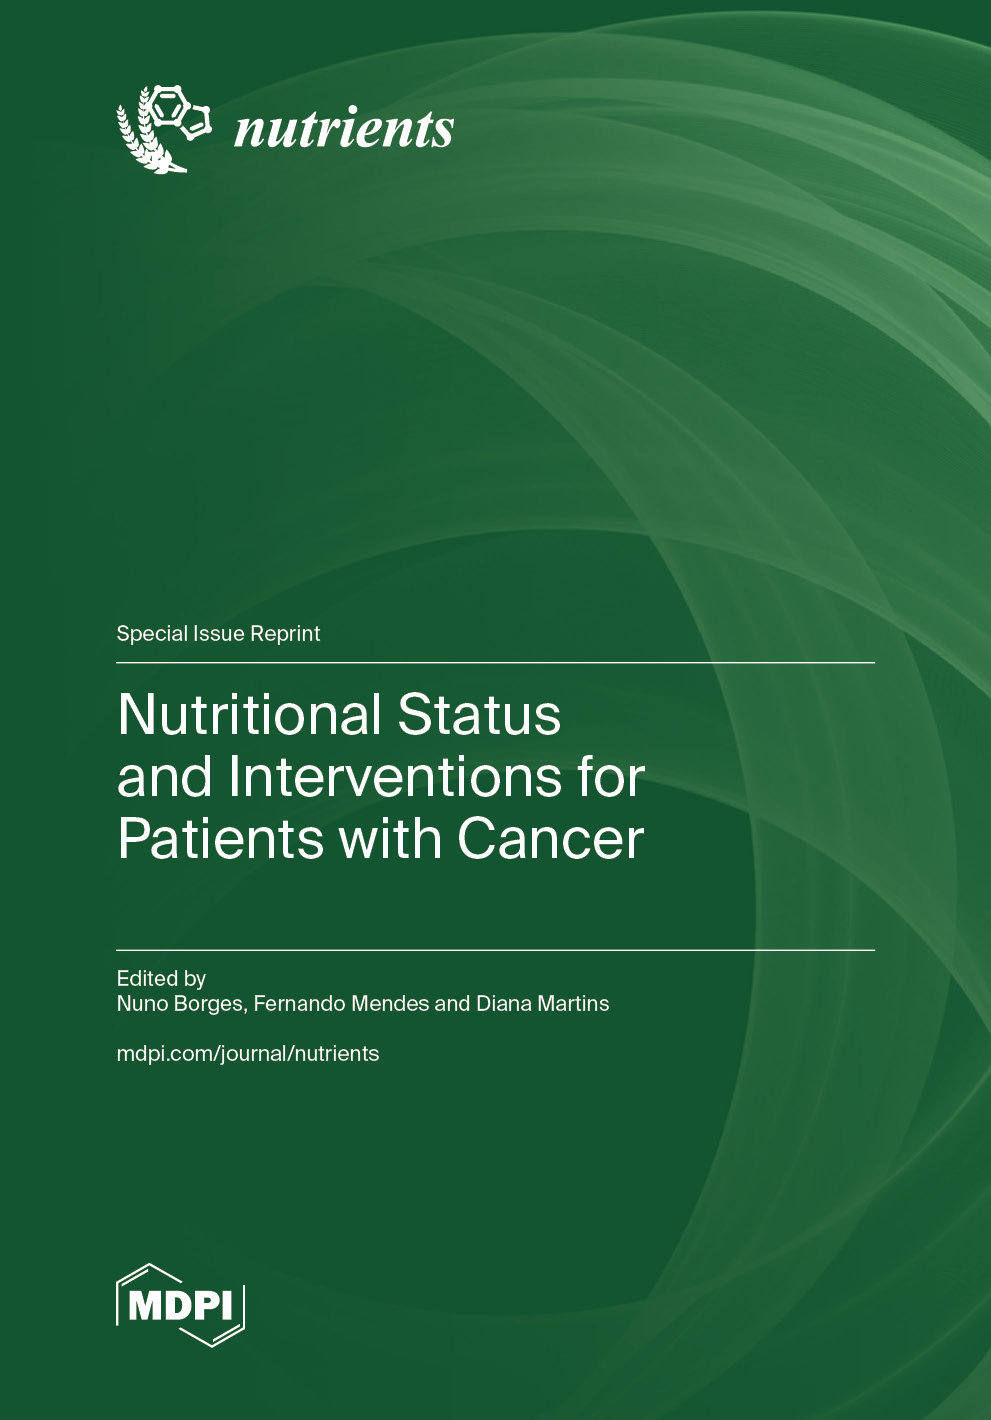 Nutritional Status and Interventions for Patients with Cancer | MDPI Books